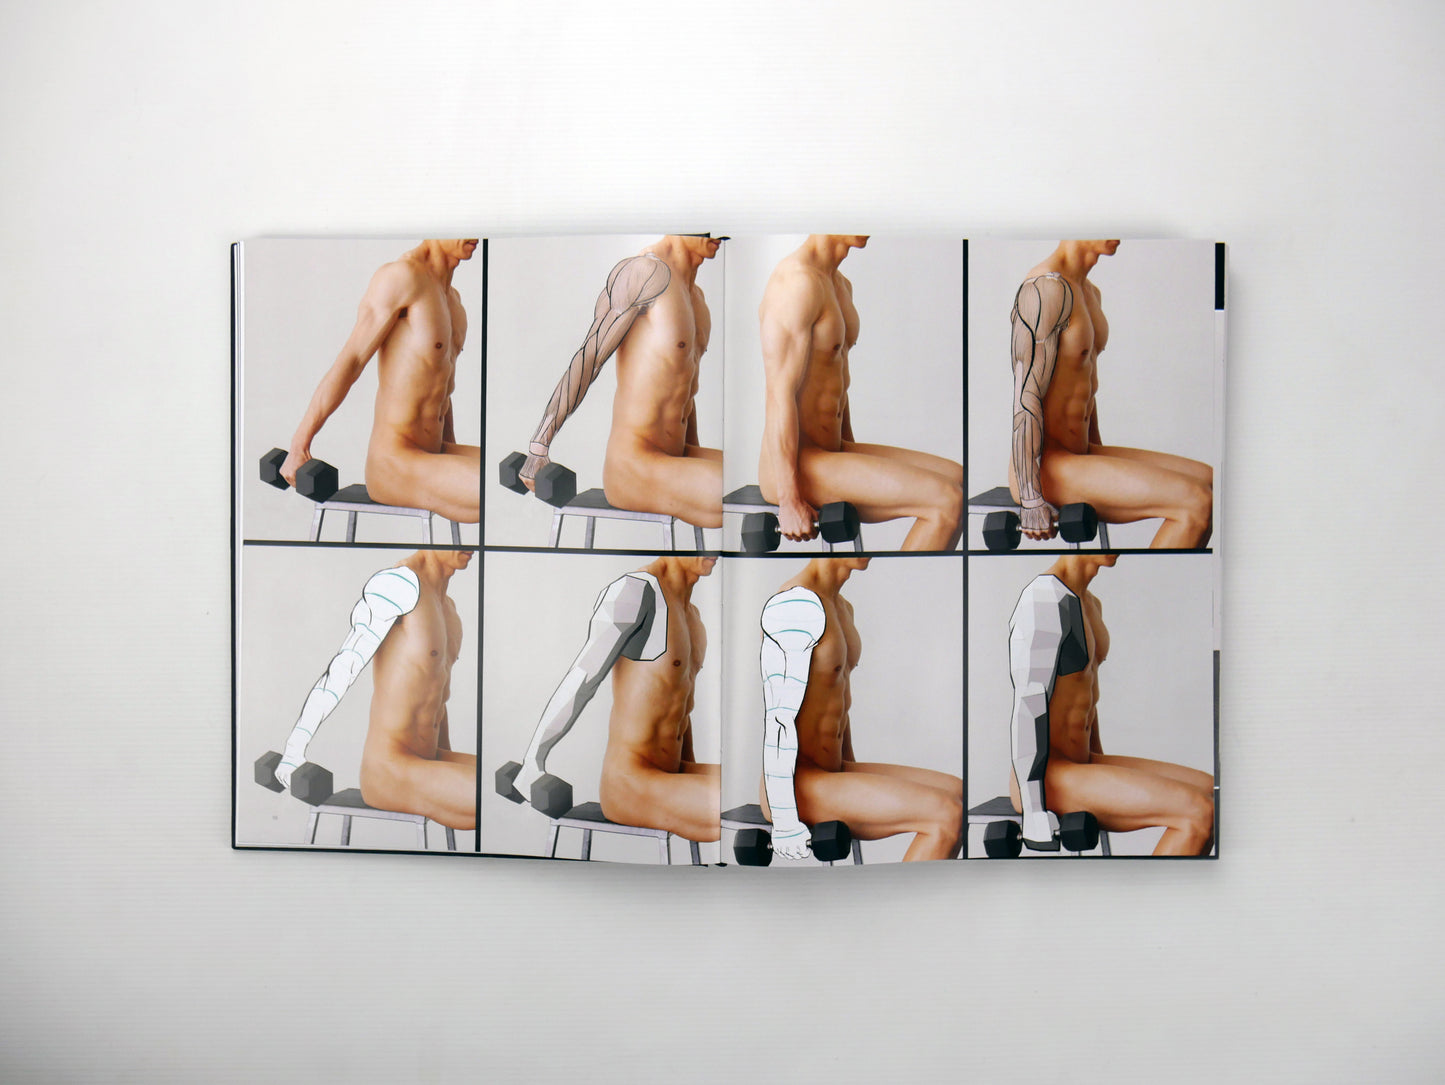 Anatomy in Motion: An Artist's Guide to Capturing Dynamic Movement - PRE-ORDER!